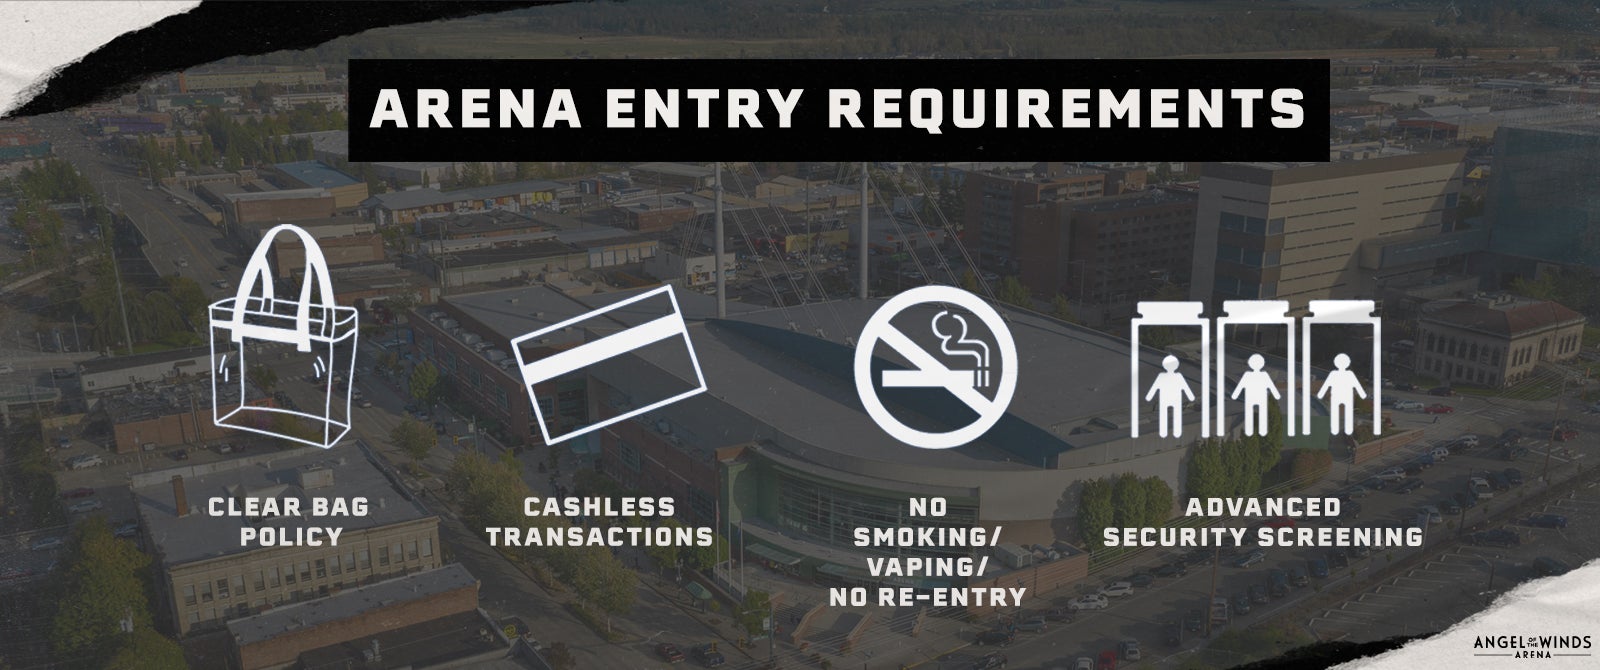 Arena Entry Requirements 1600 670.jpg